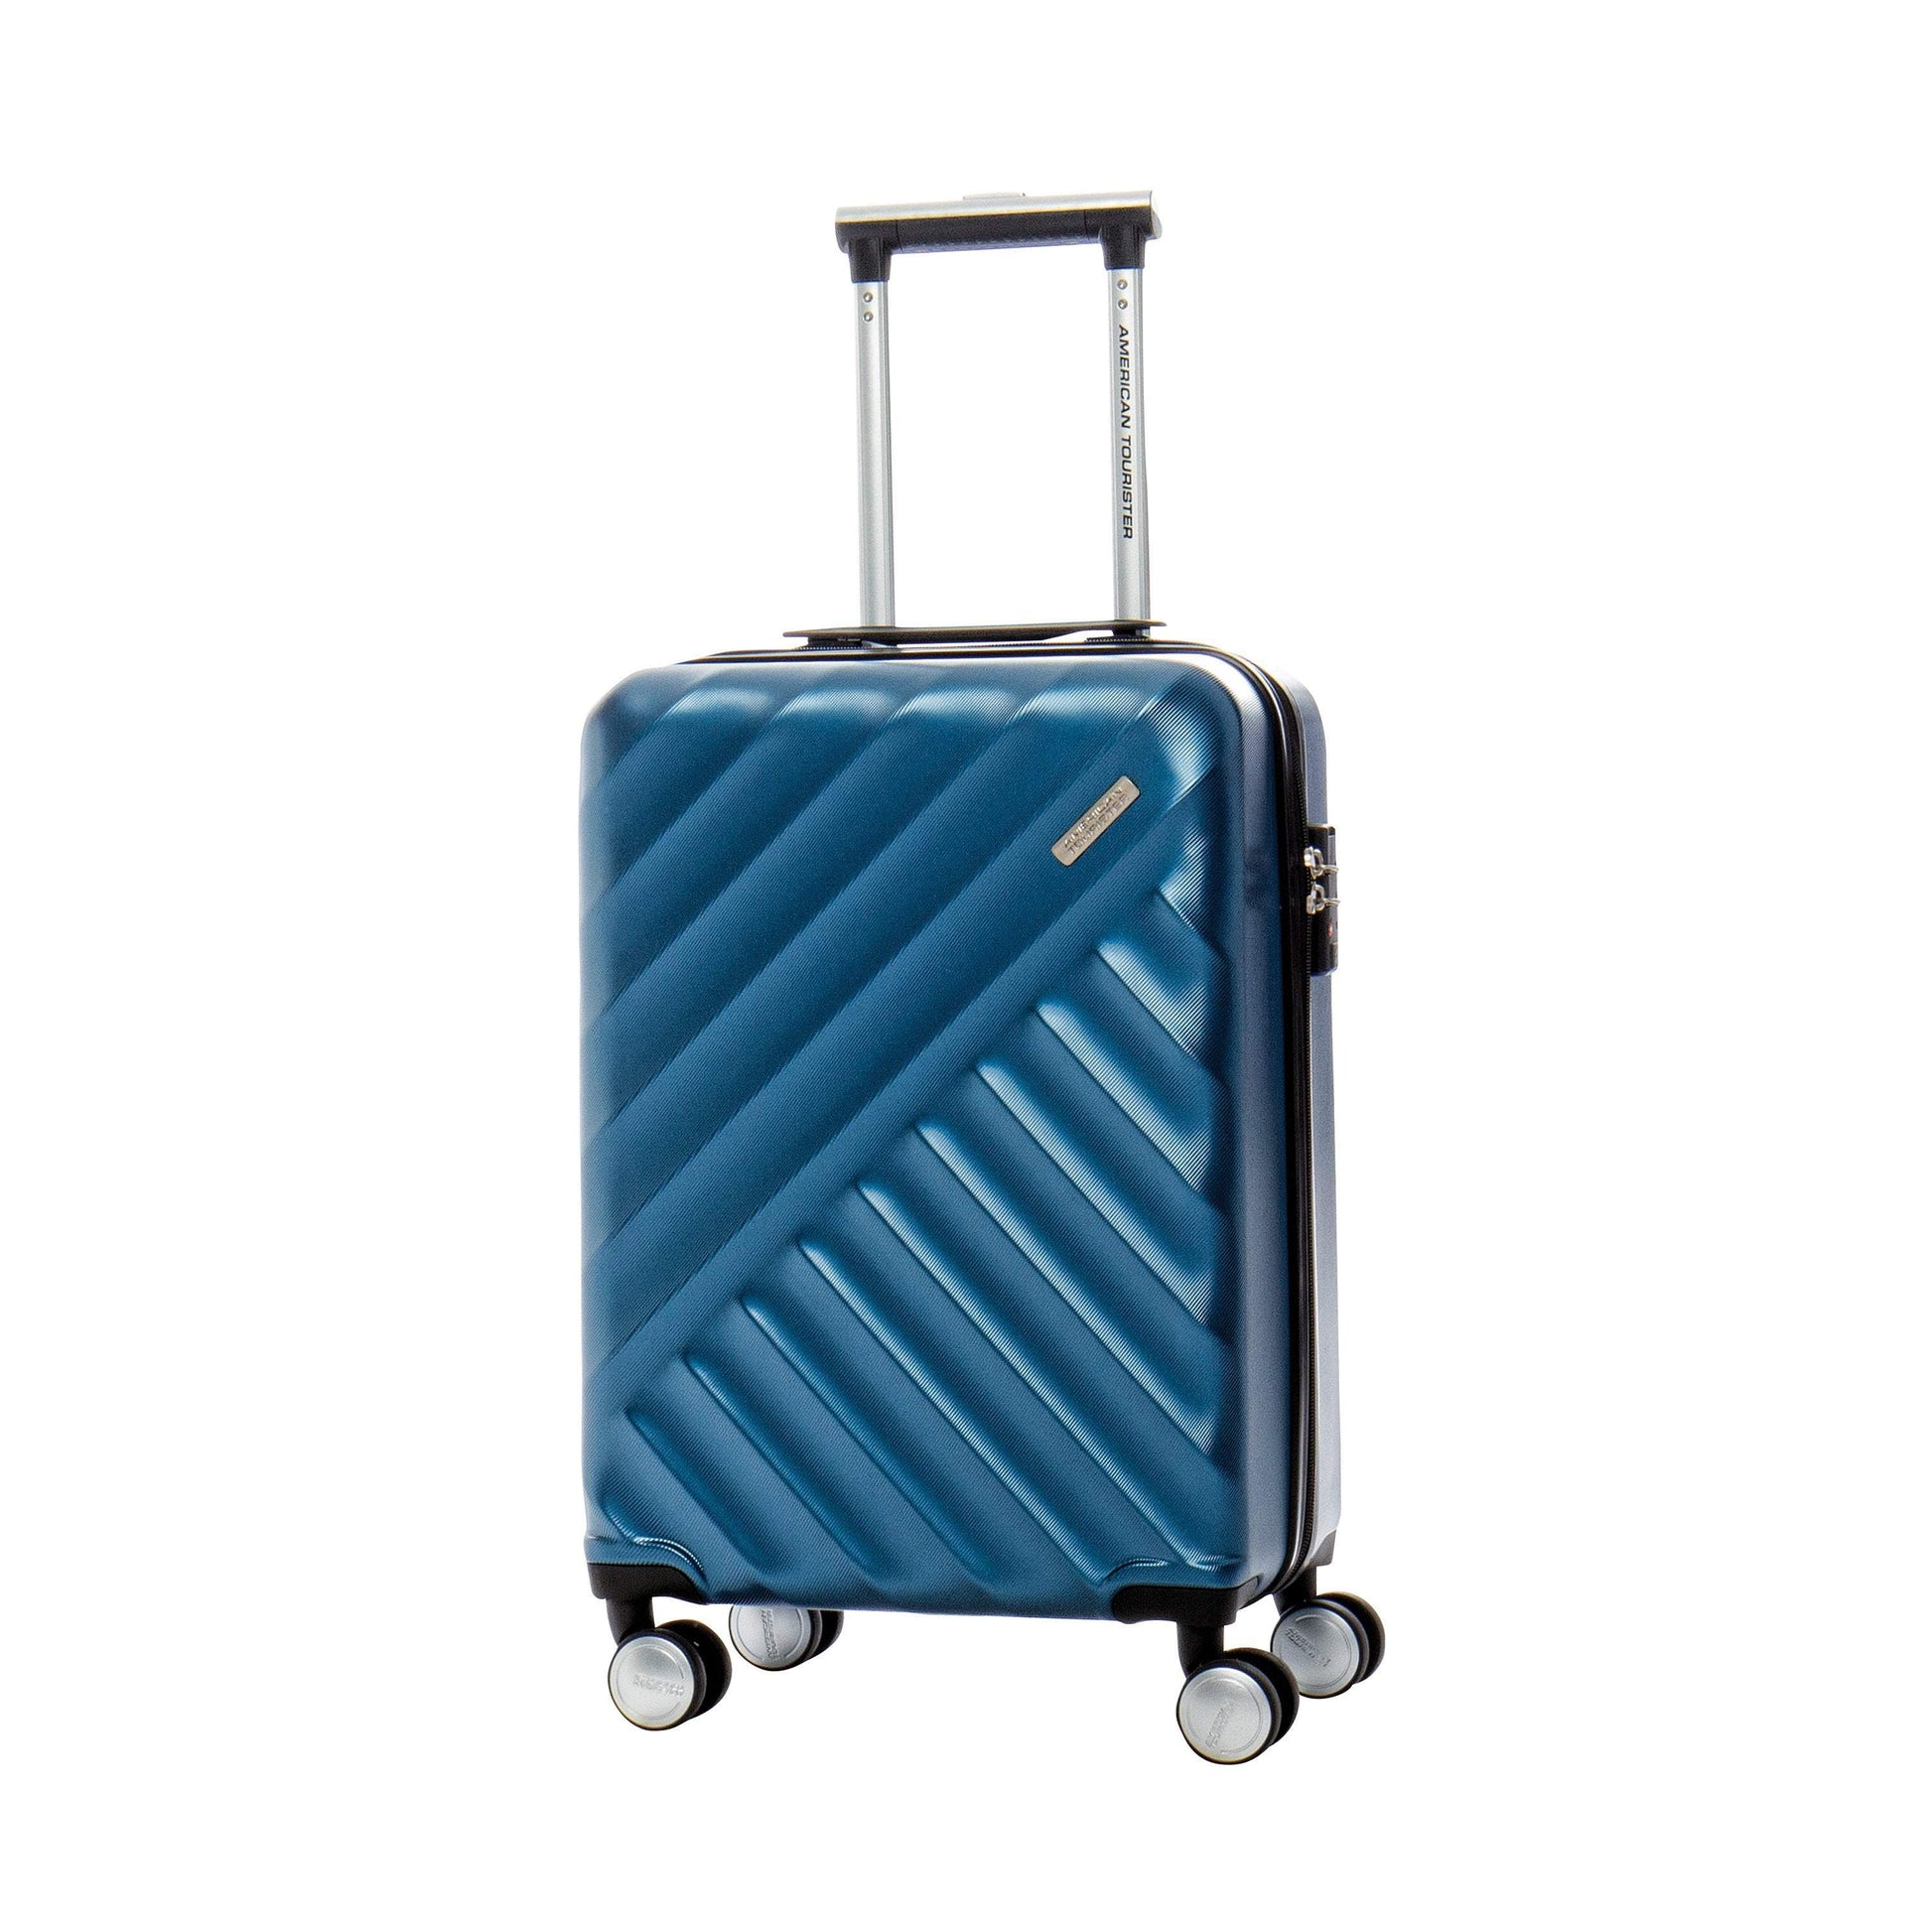 American Tourister Crave Collection Carry-On Spinner Luggage - Blue